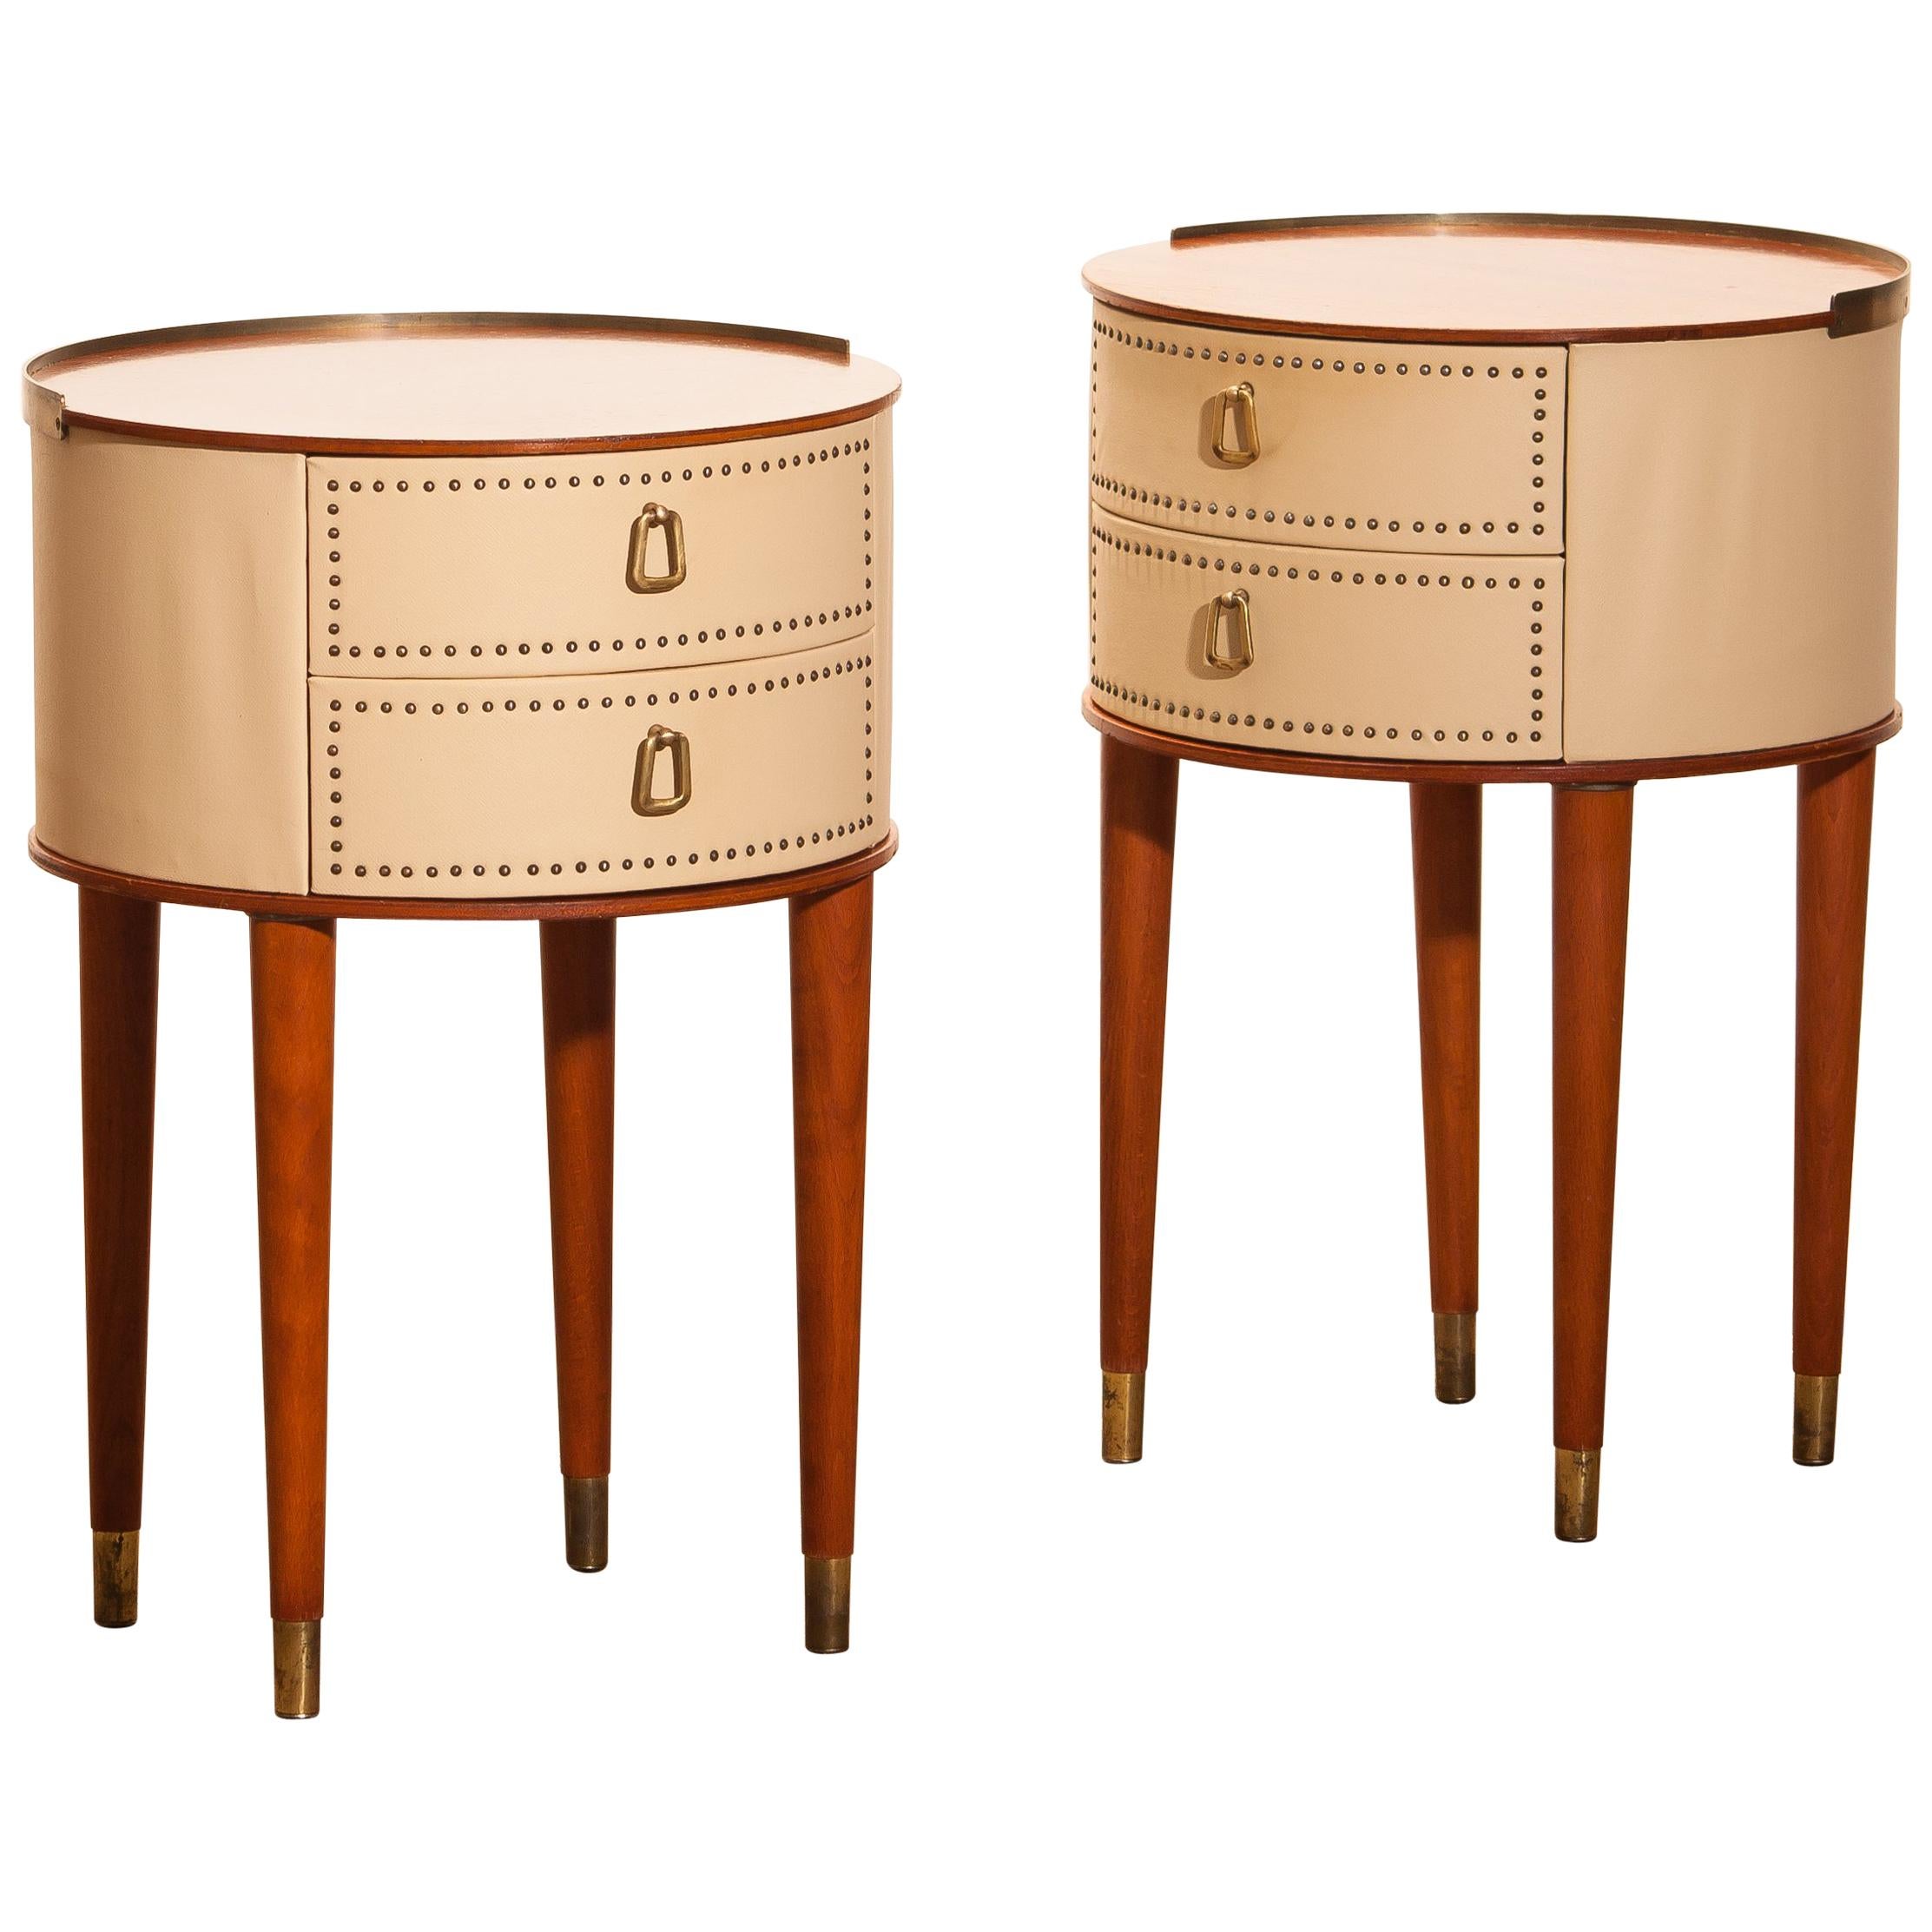 1950s, Bedside Tables in Mahogany and Brass by Halvdan Pettersson, Tibro, Sweden